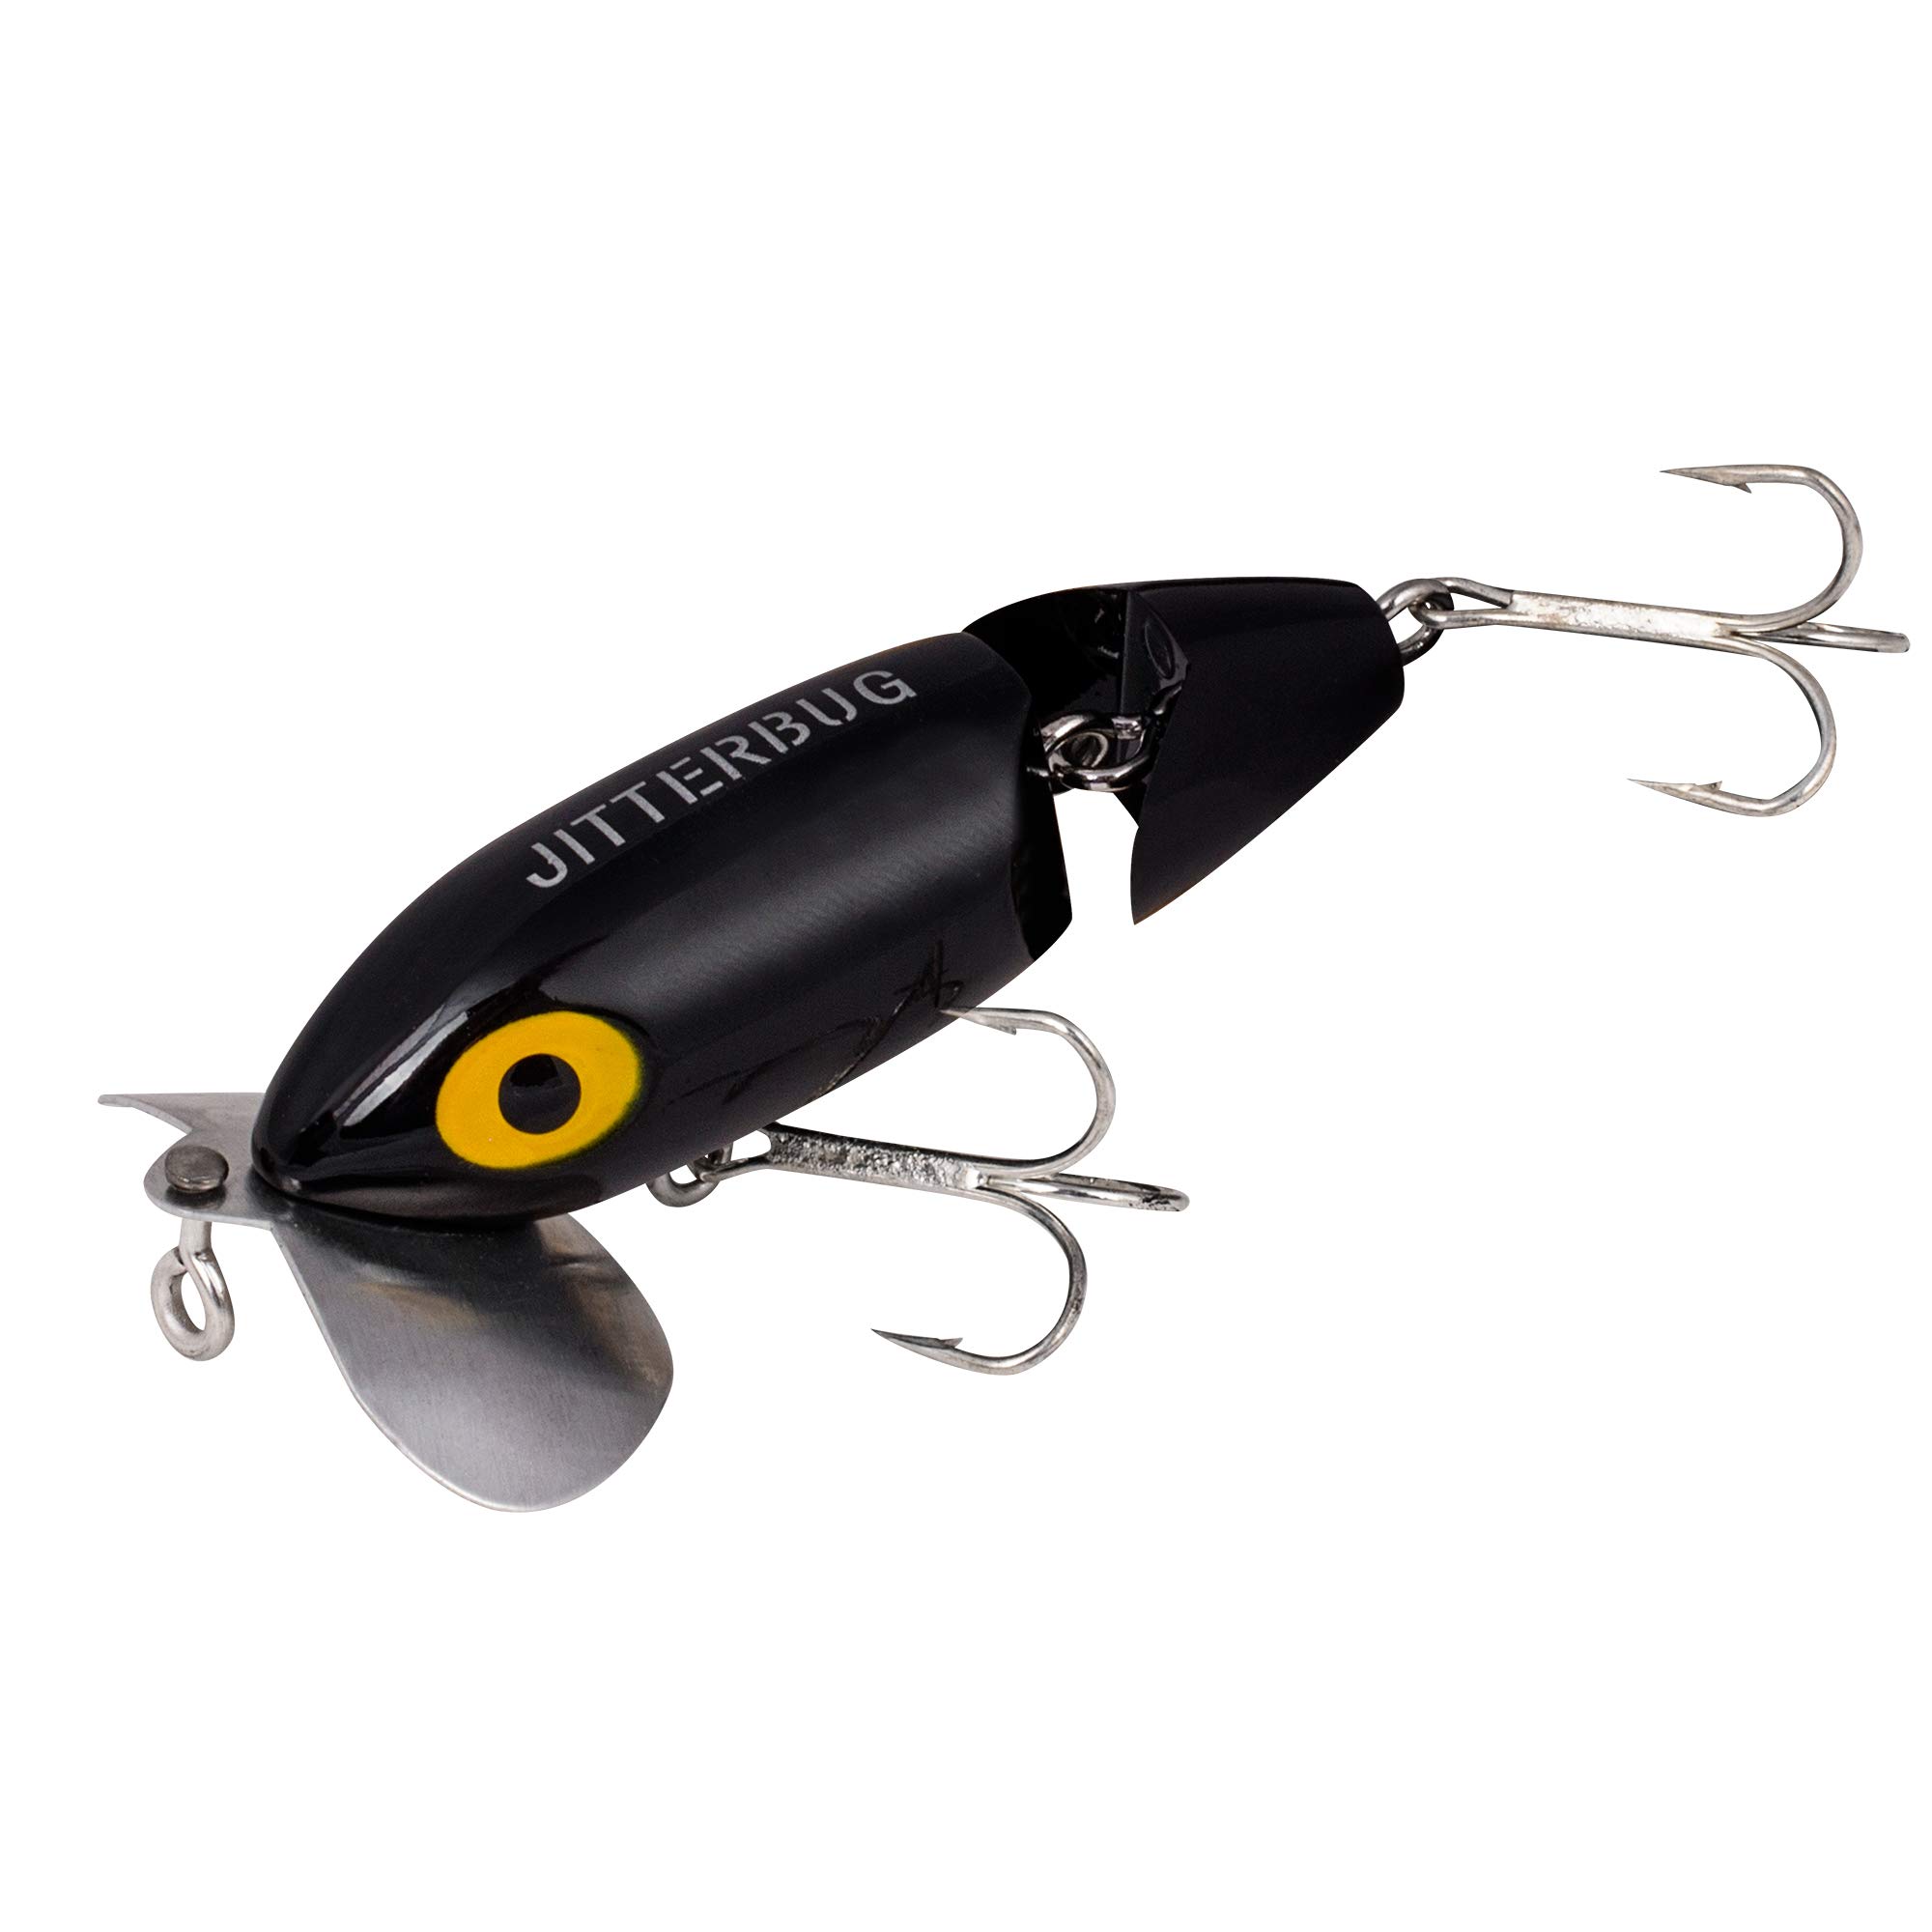 Arbogast Jitterbug Topwater Bass Fishing Lure - Excellent for